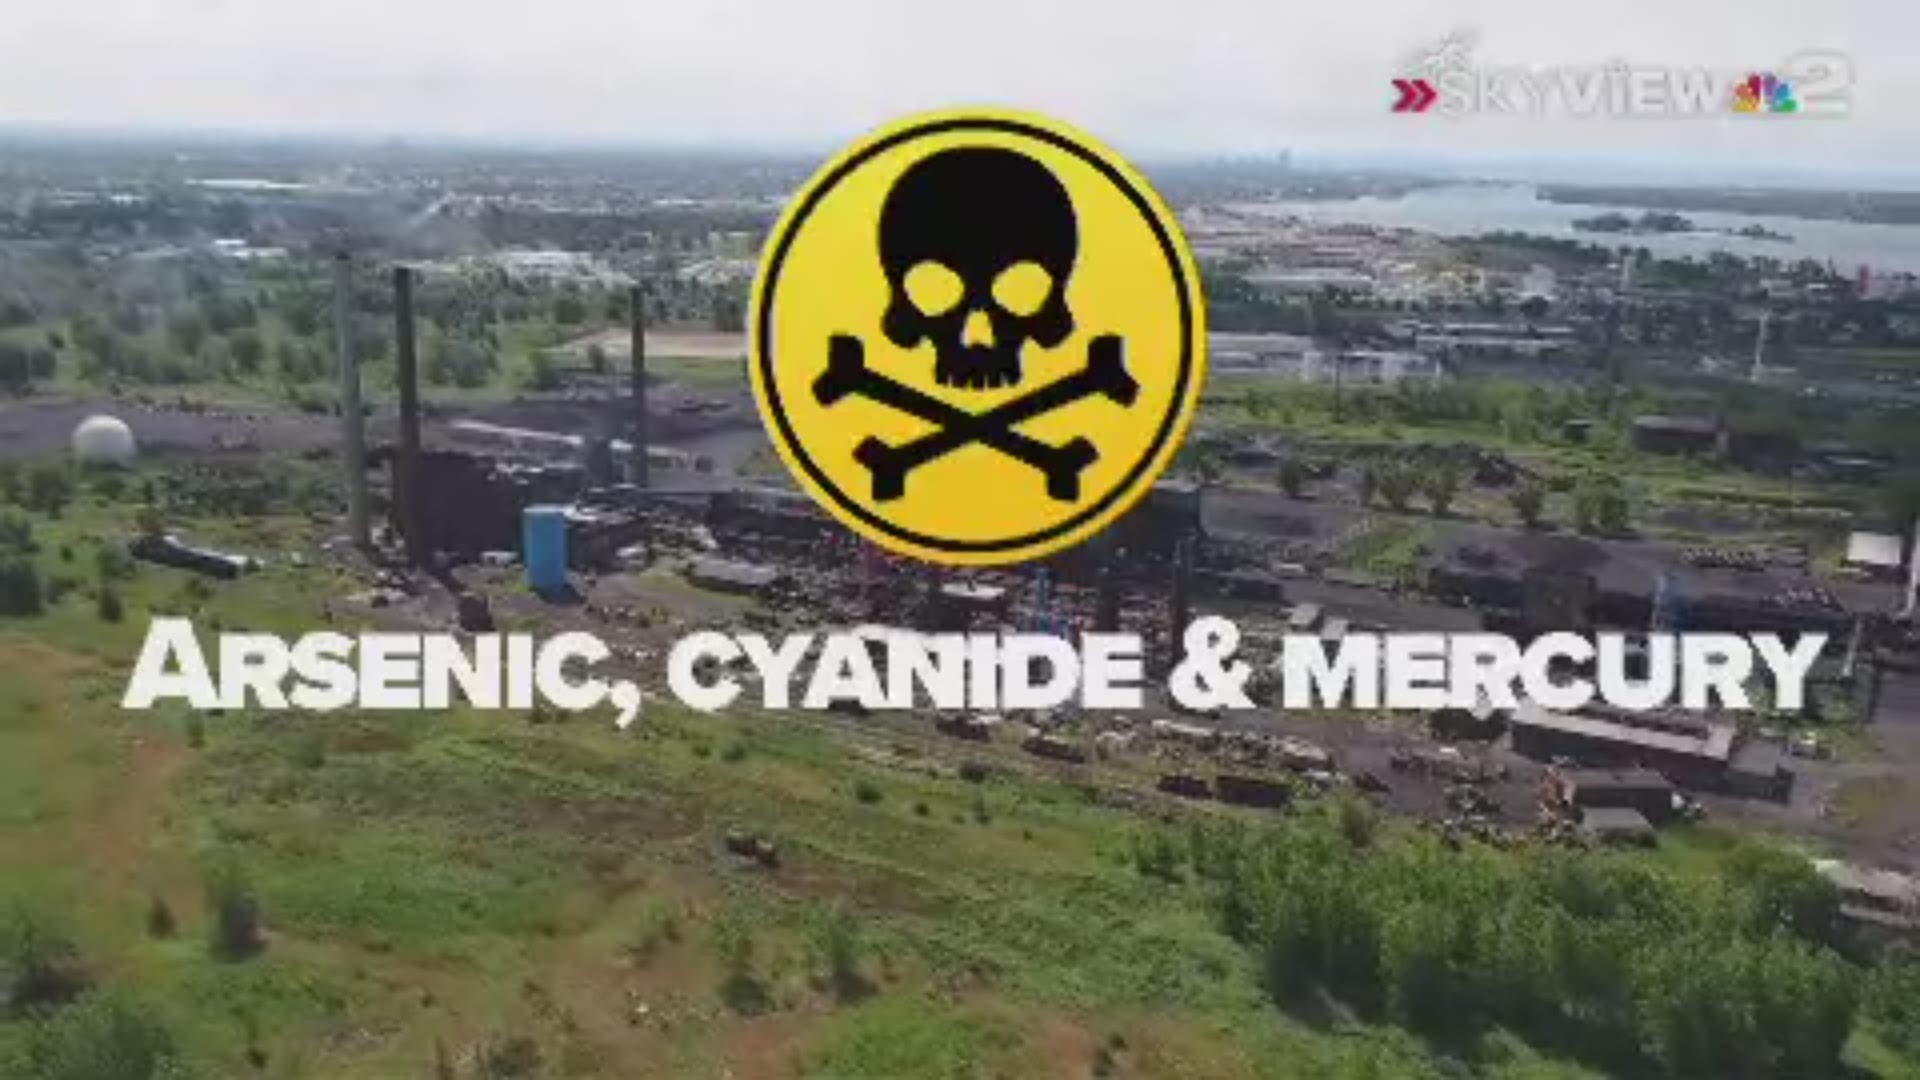 A university research team released a report Wednesday that found — to no one’s surprise — that some of the soil around the Tonawanda Coke plant is contaminated with a host of toxic chemicals.